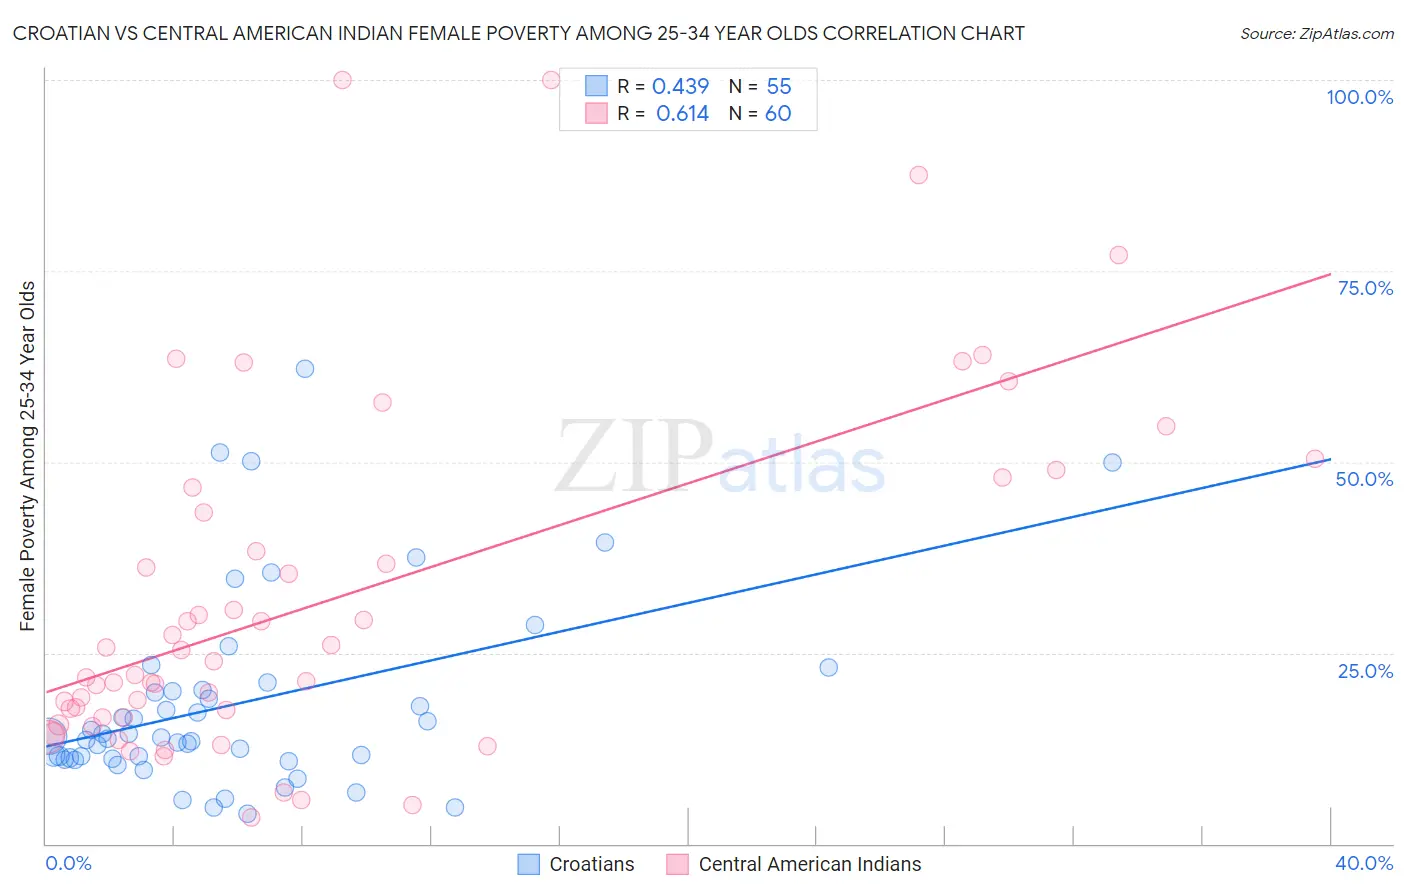 Croatian vs Central American Indian Female Poverty Among 25-34 Year Olds